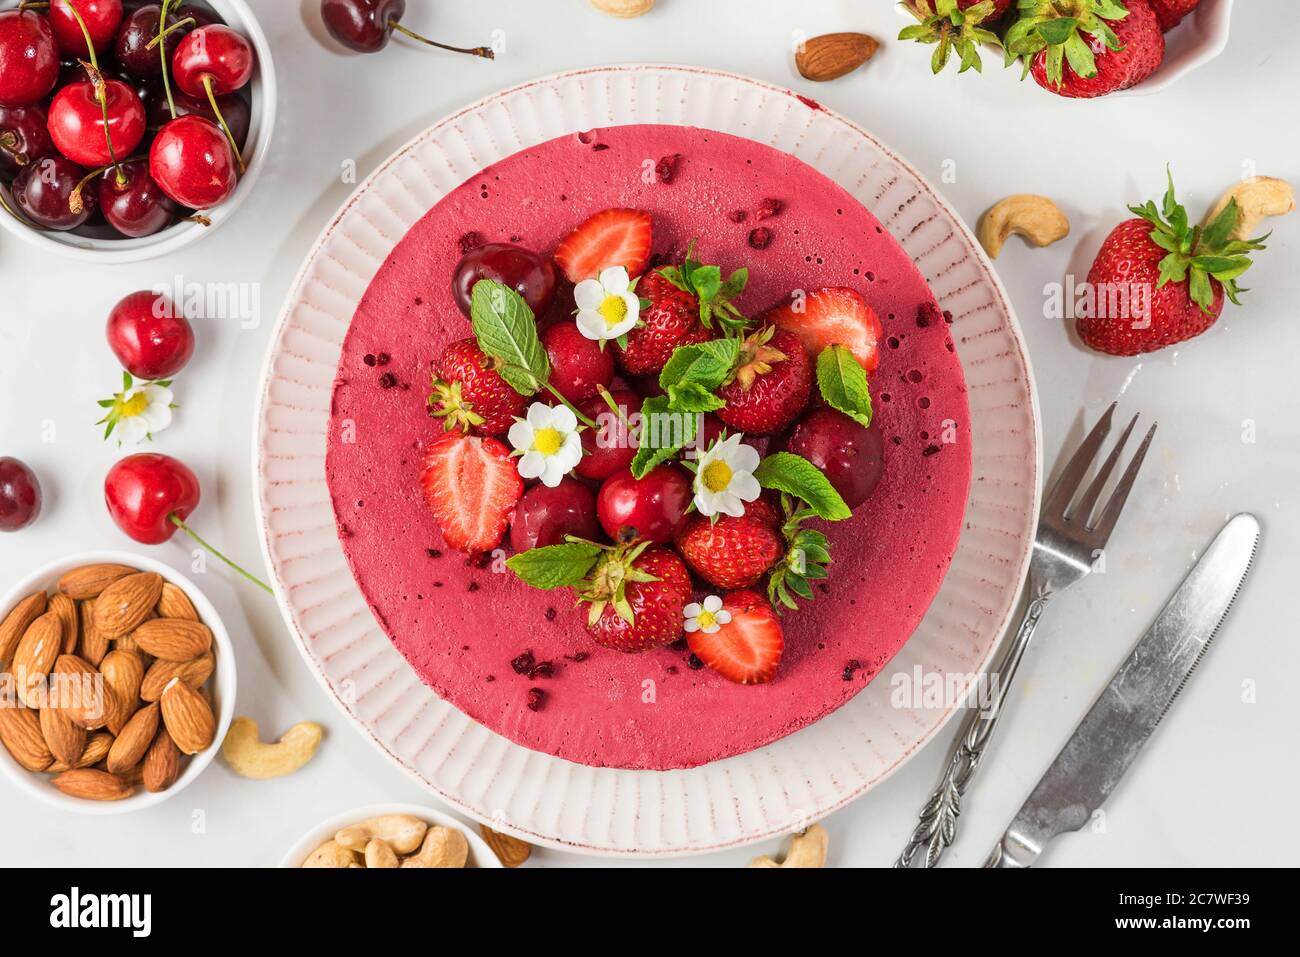 Berry cheesecake with fresh strawberries, cherries and flowers on white background with knife and fork. top view. healthy vegan food dessert Stock Photo